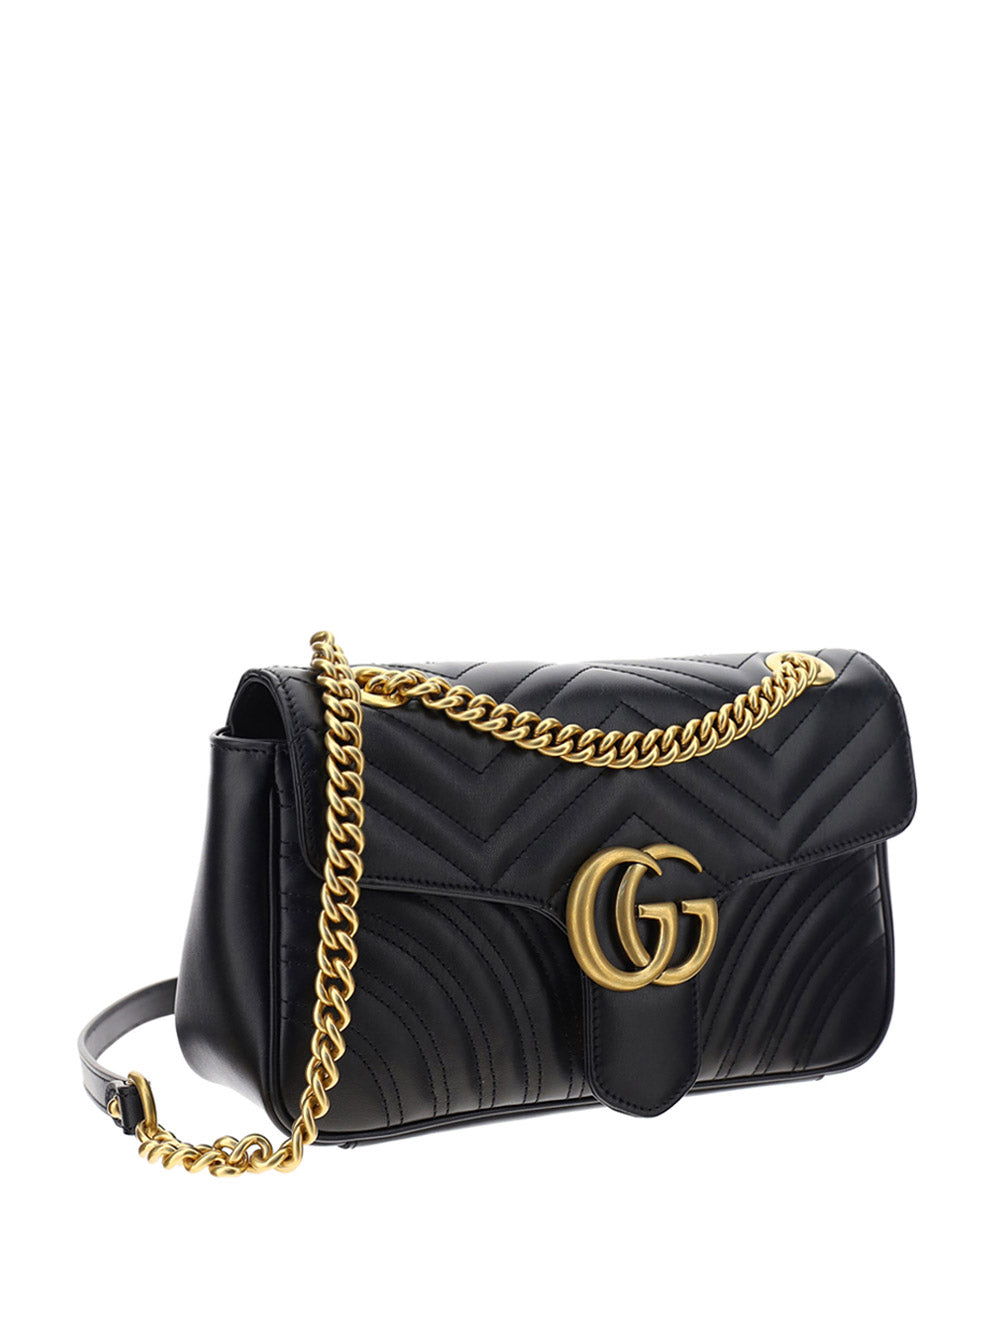 GUCCI Gg Marmont Small Leather Shoulder Bag Black